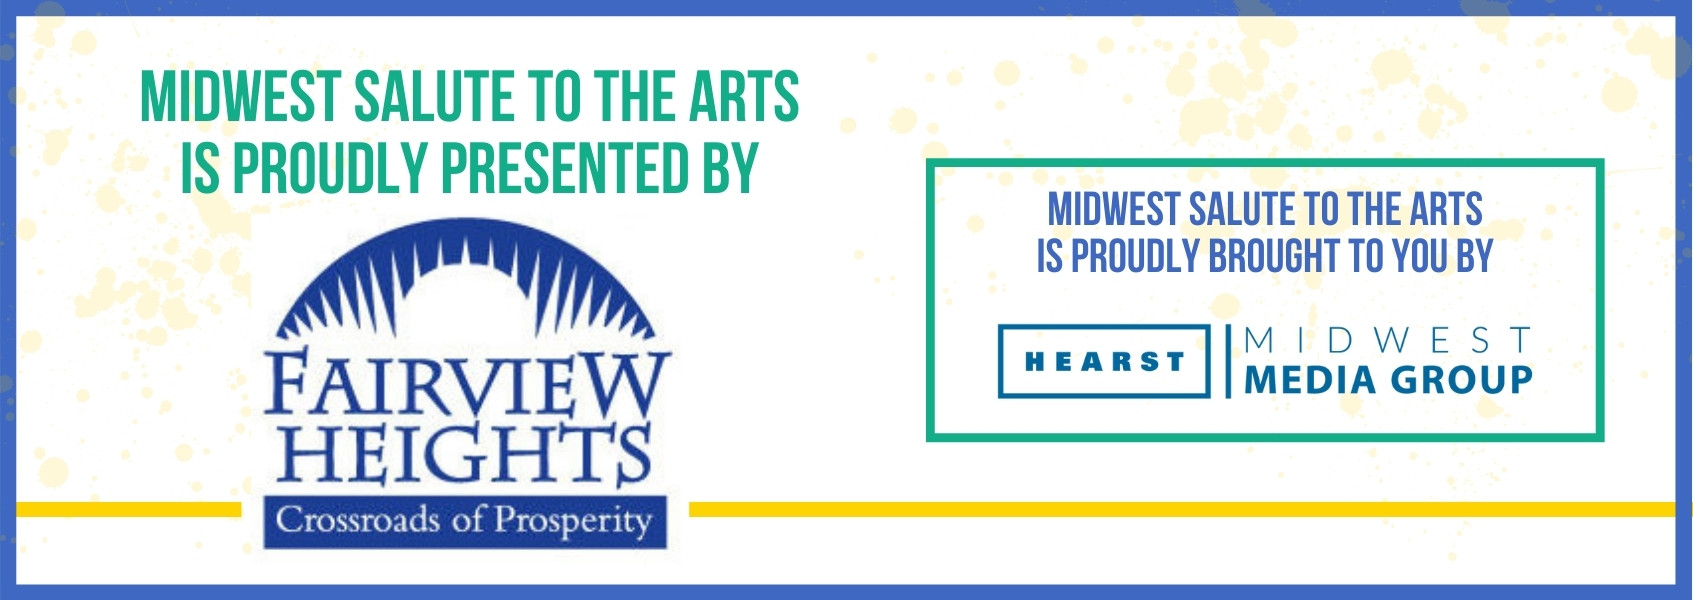 midwest-salute-to-the-arts-fairview-heights-and-hearst-graphic